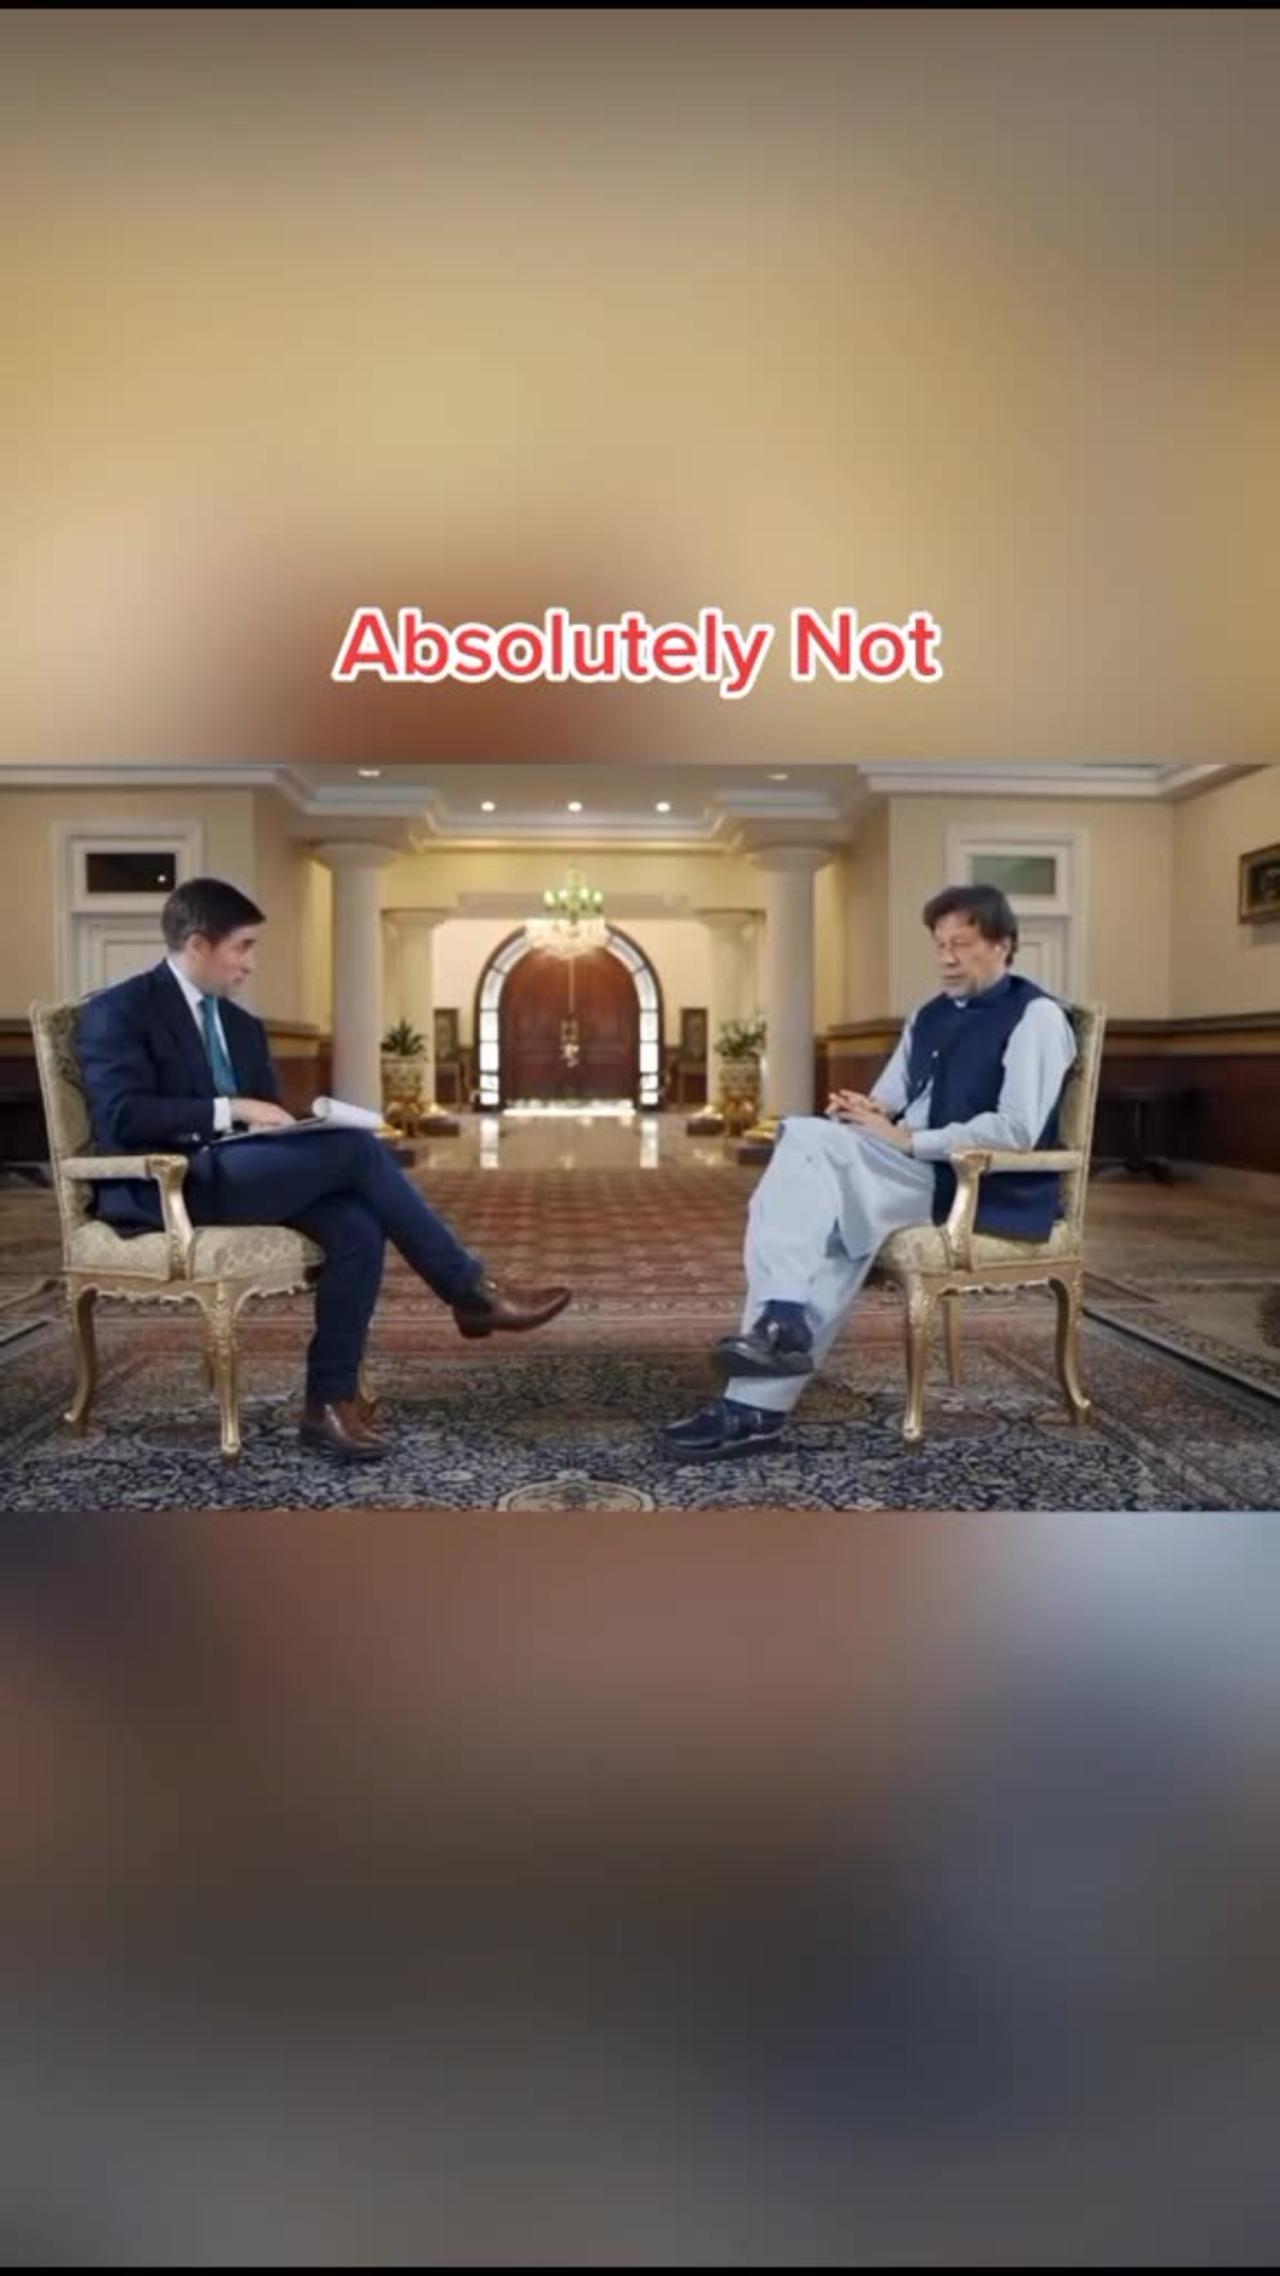 Pakistan prime minister Imran khan reply America absolutely not